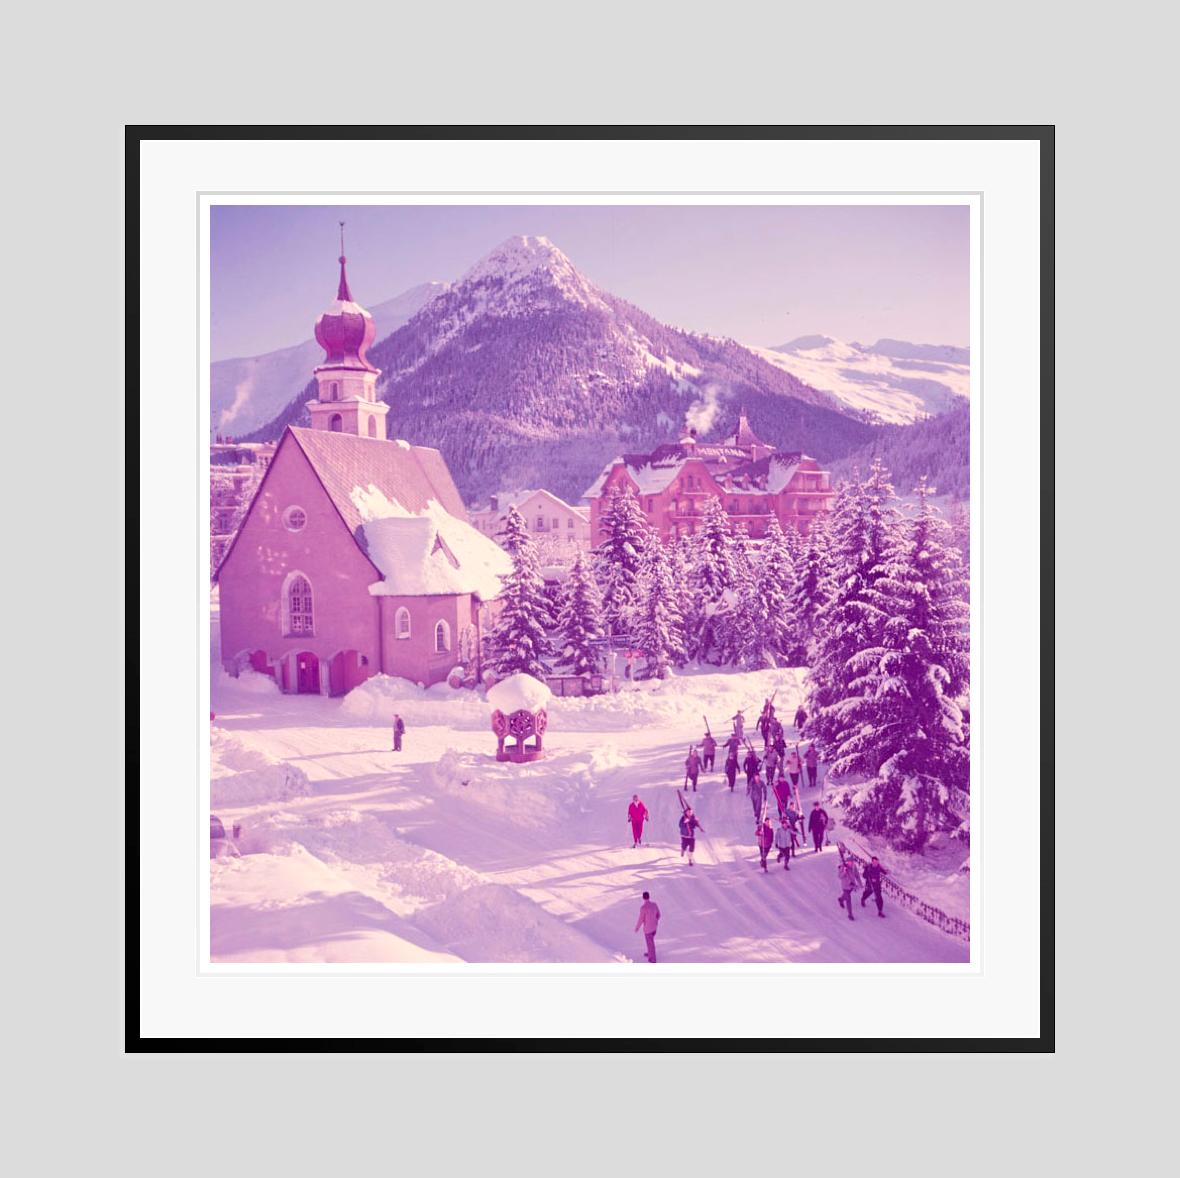 A Church In The Snow

1951

Skiiers walk past a snowcovered church, Klosters, Switzerland, 1951

by Toni Frissell

12x12 inches / 30 x 30 cm paper size 
Archival pigment print
unframed 
(framing available see examples - please enquire) 

Limited